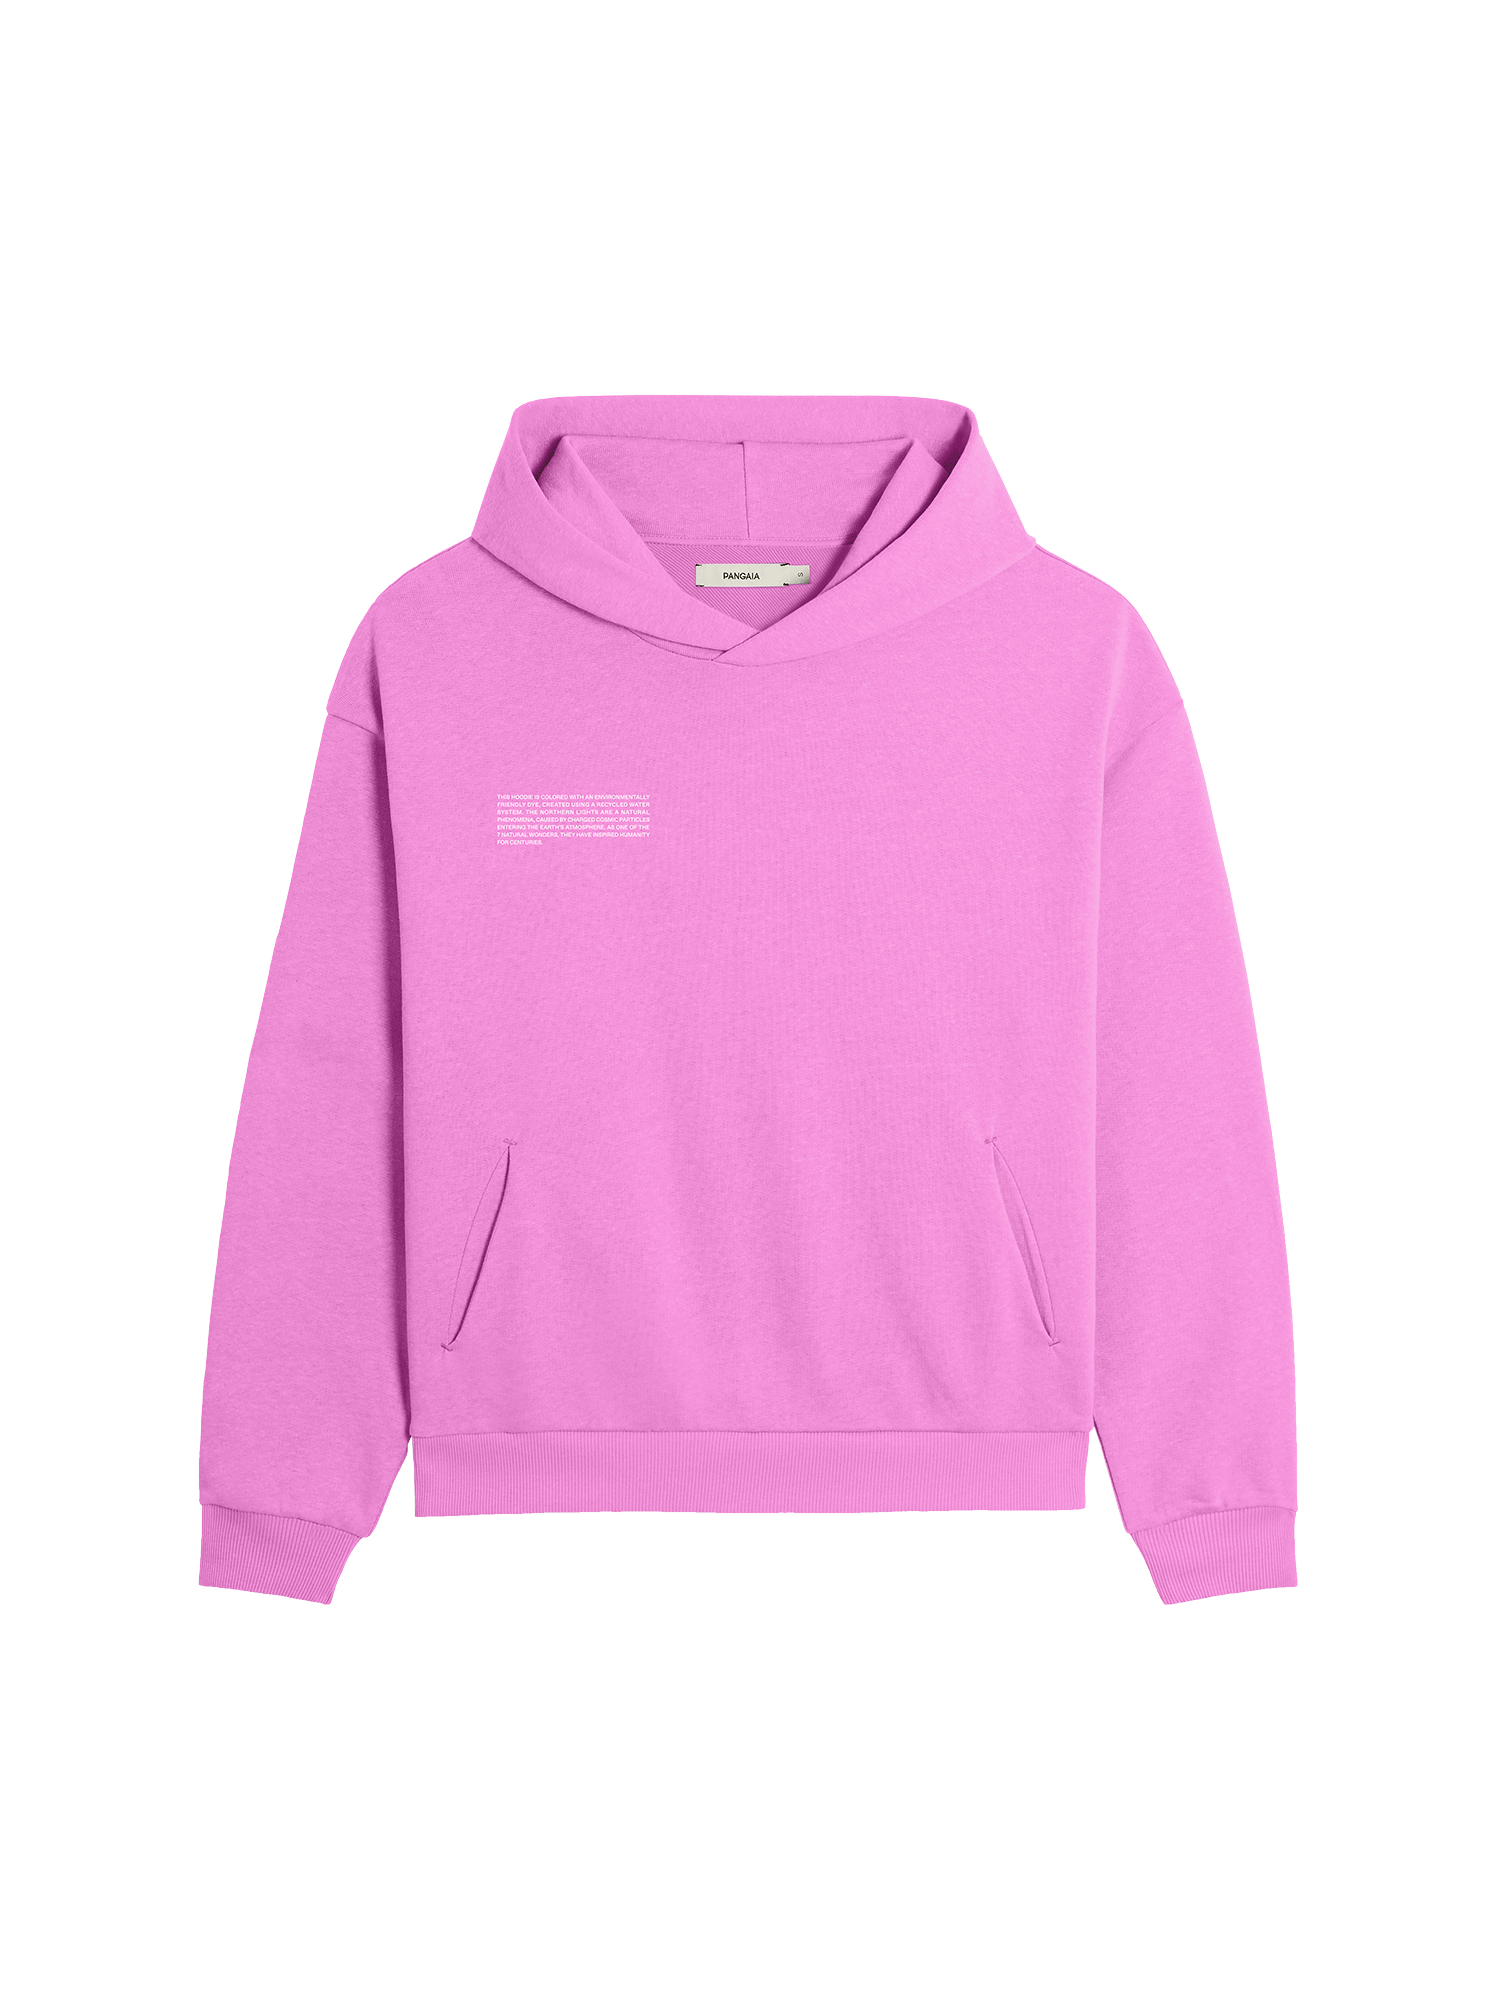 https://storage.googleapis.com/download/storage/v1/b/whering.appspot.com/o/marketplace_product_images%2Fpangaia-archive-365-midweight-pullover-hoodiegalaxy-pink-vymCrjE1jbaRkyYz8ZgNvY.png?generation=1692075632115974&alt=media